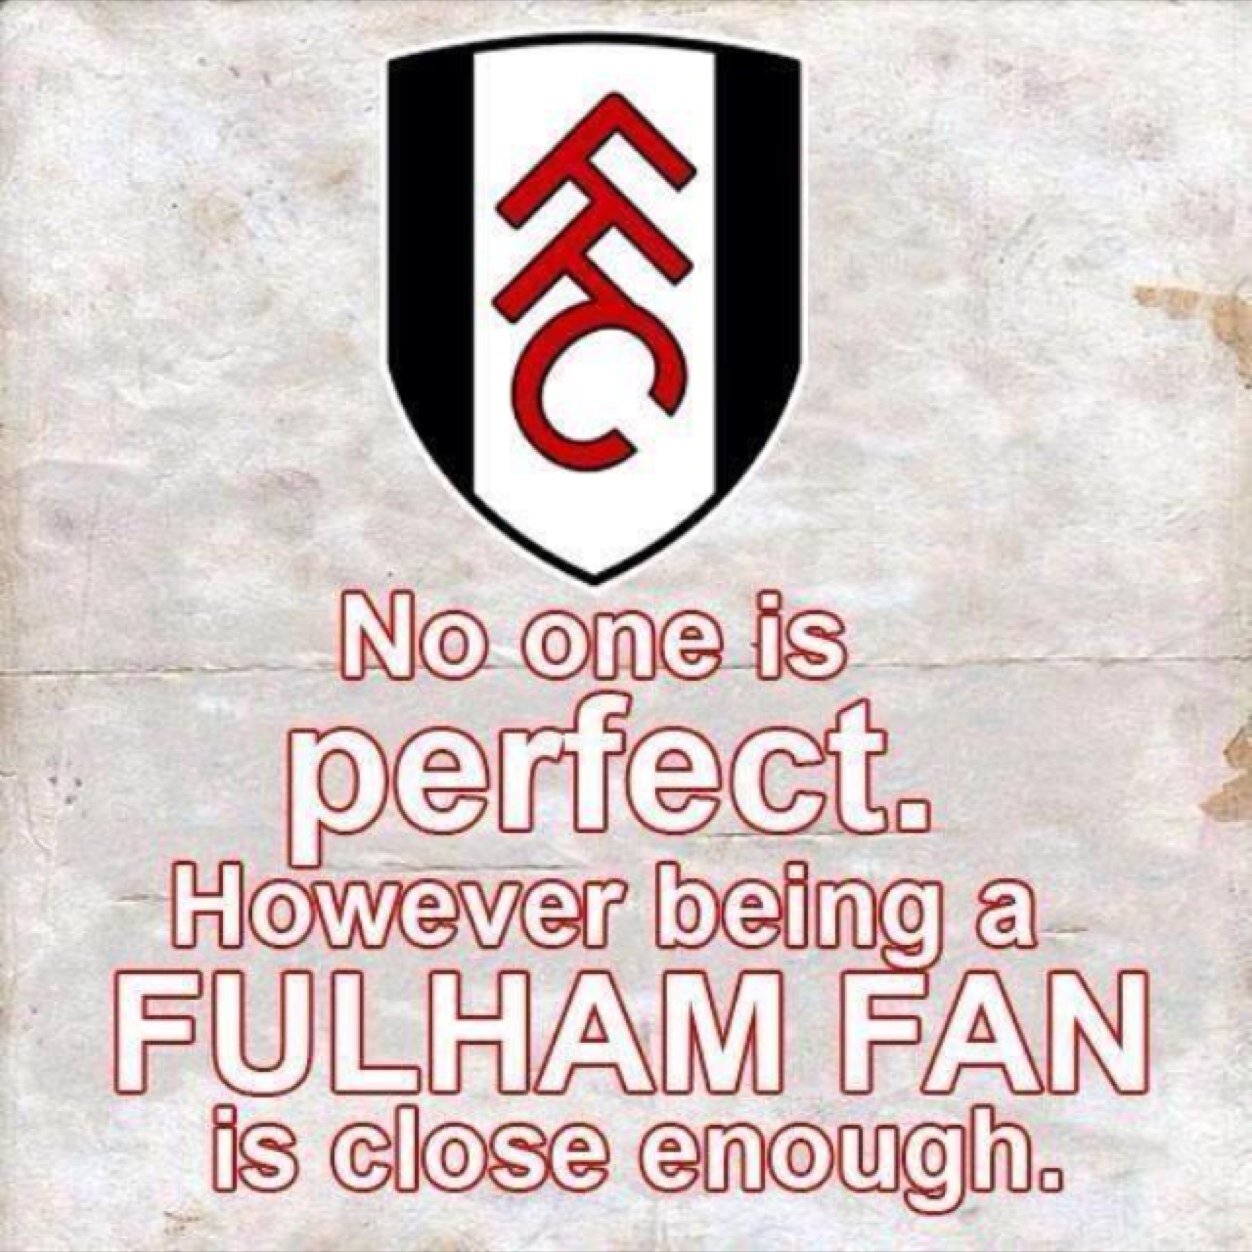 Huge fulham fan ! COYW fulham fans follow will keep you updated with scores and transfers